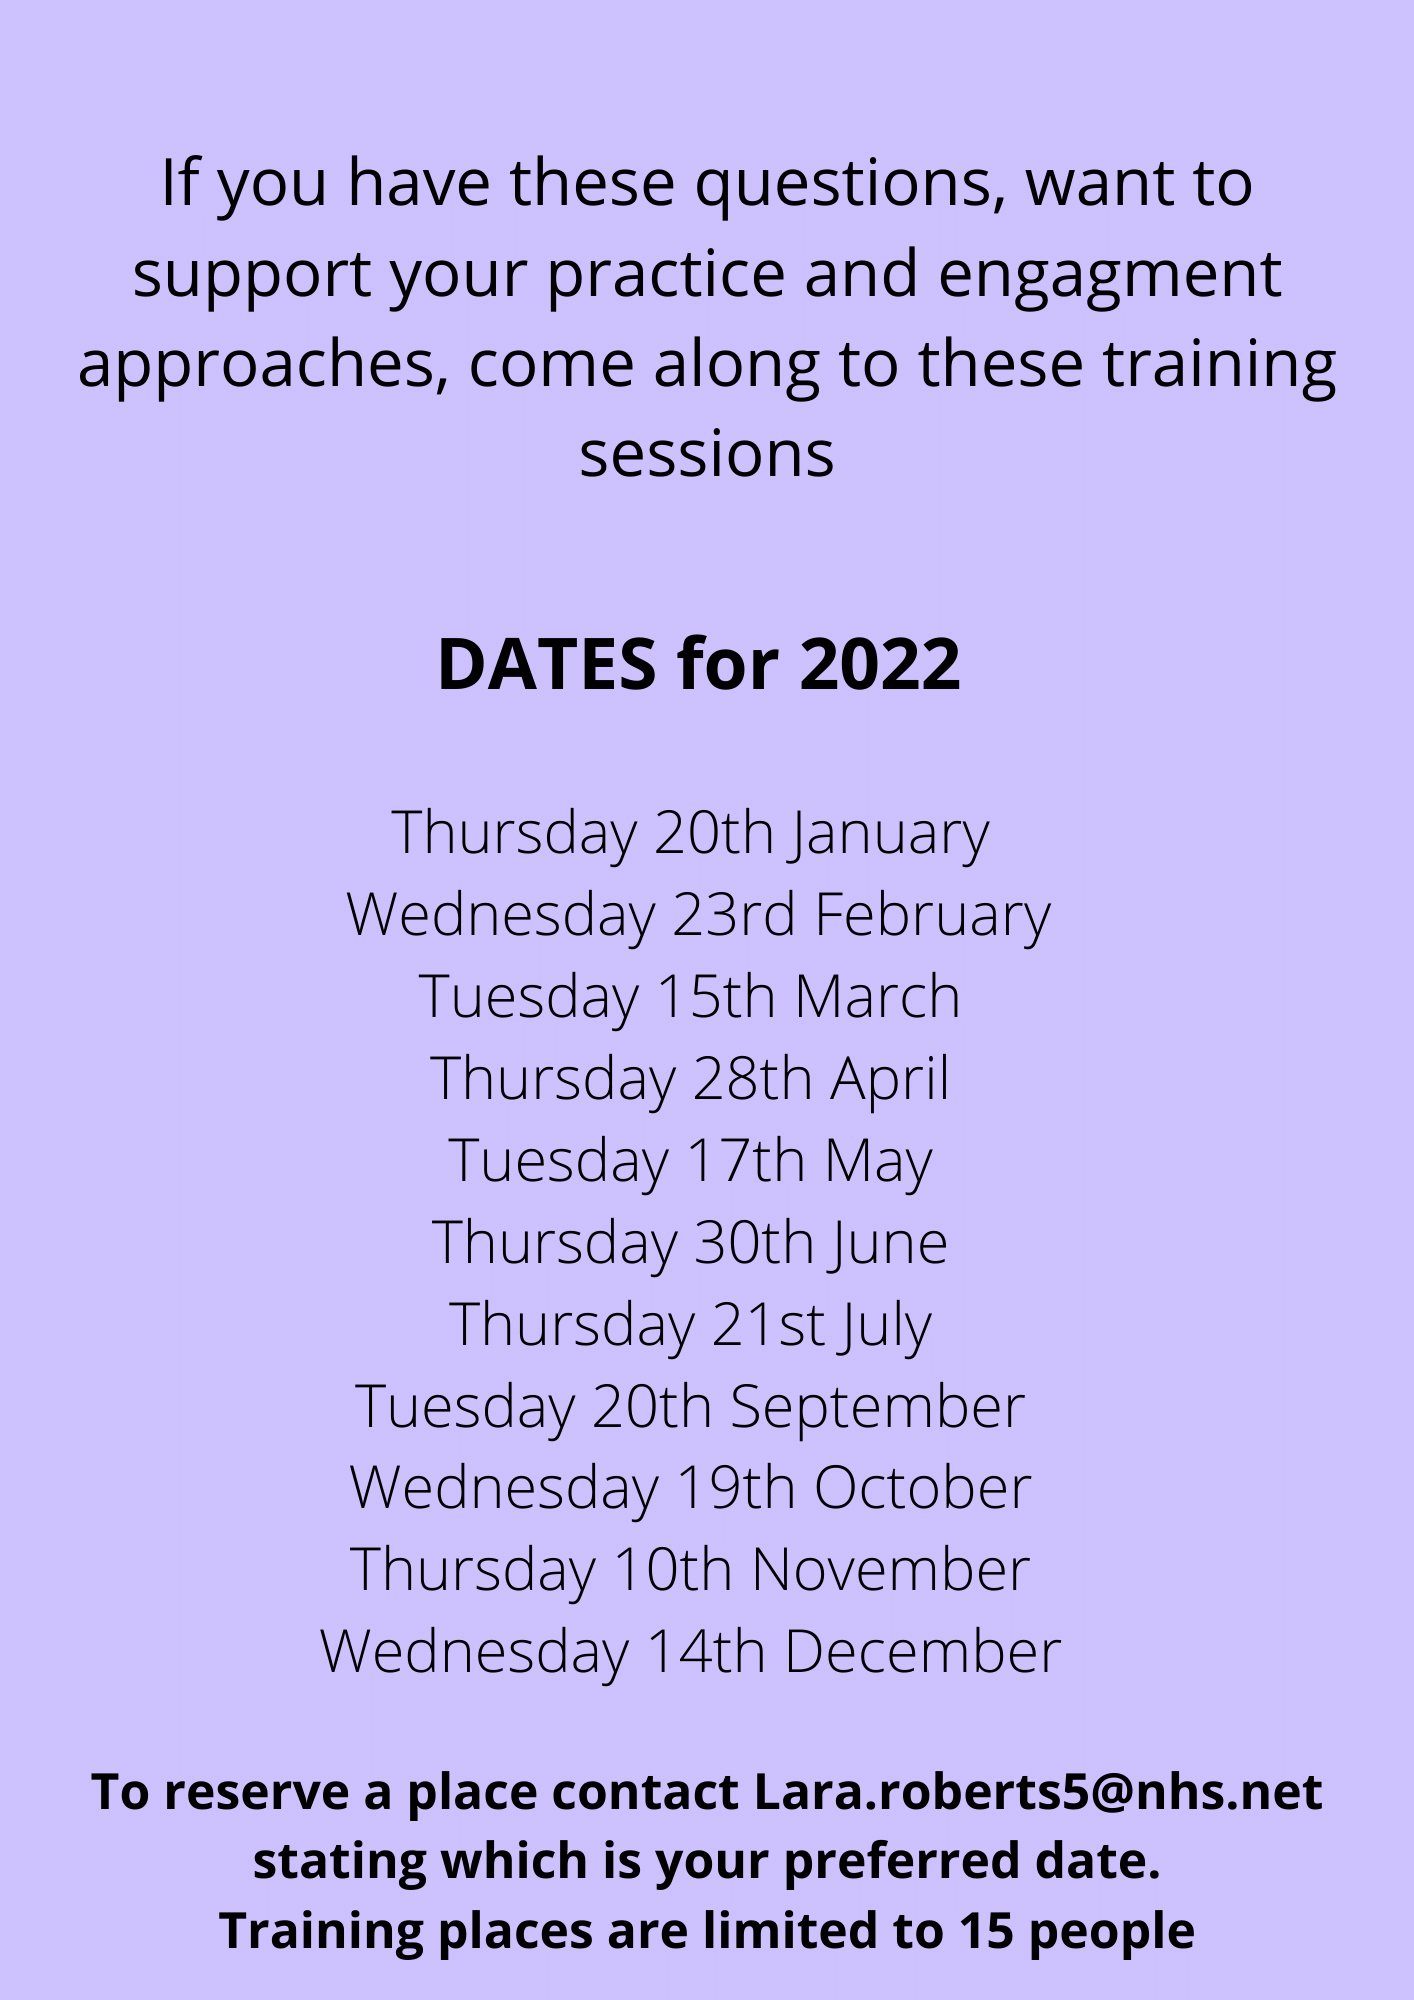 Dates for 2022